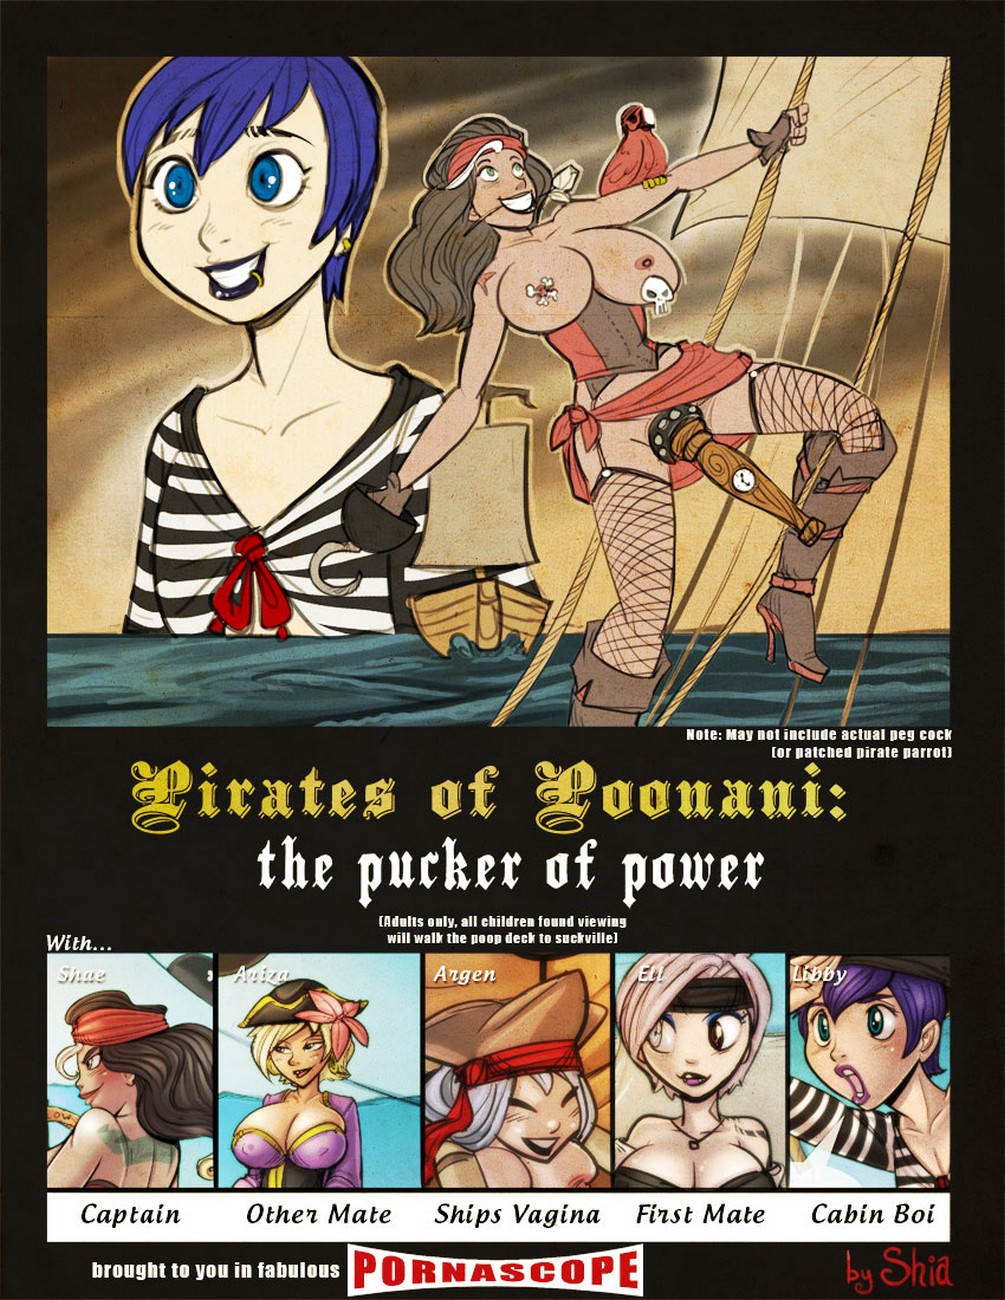 Pirates Of Poonami The Pucker Of Power